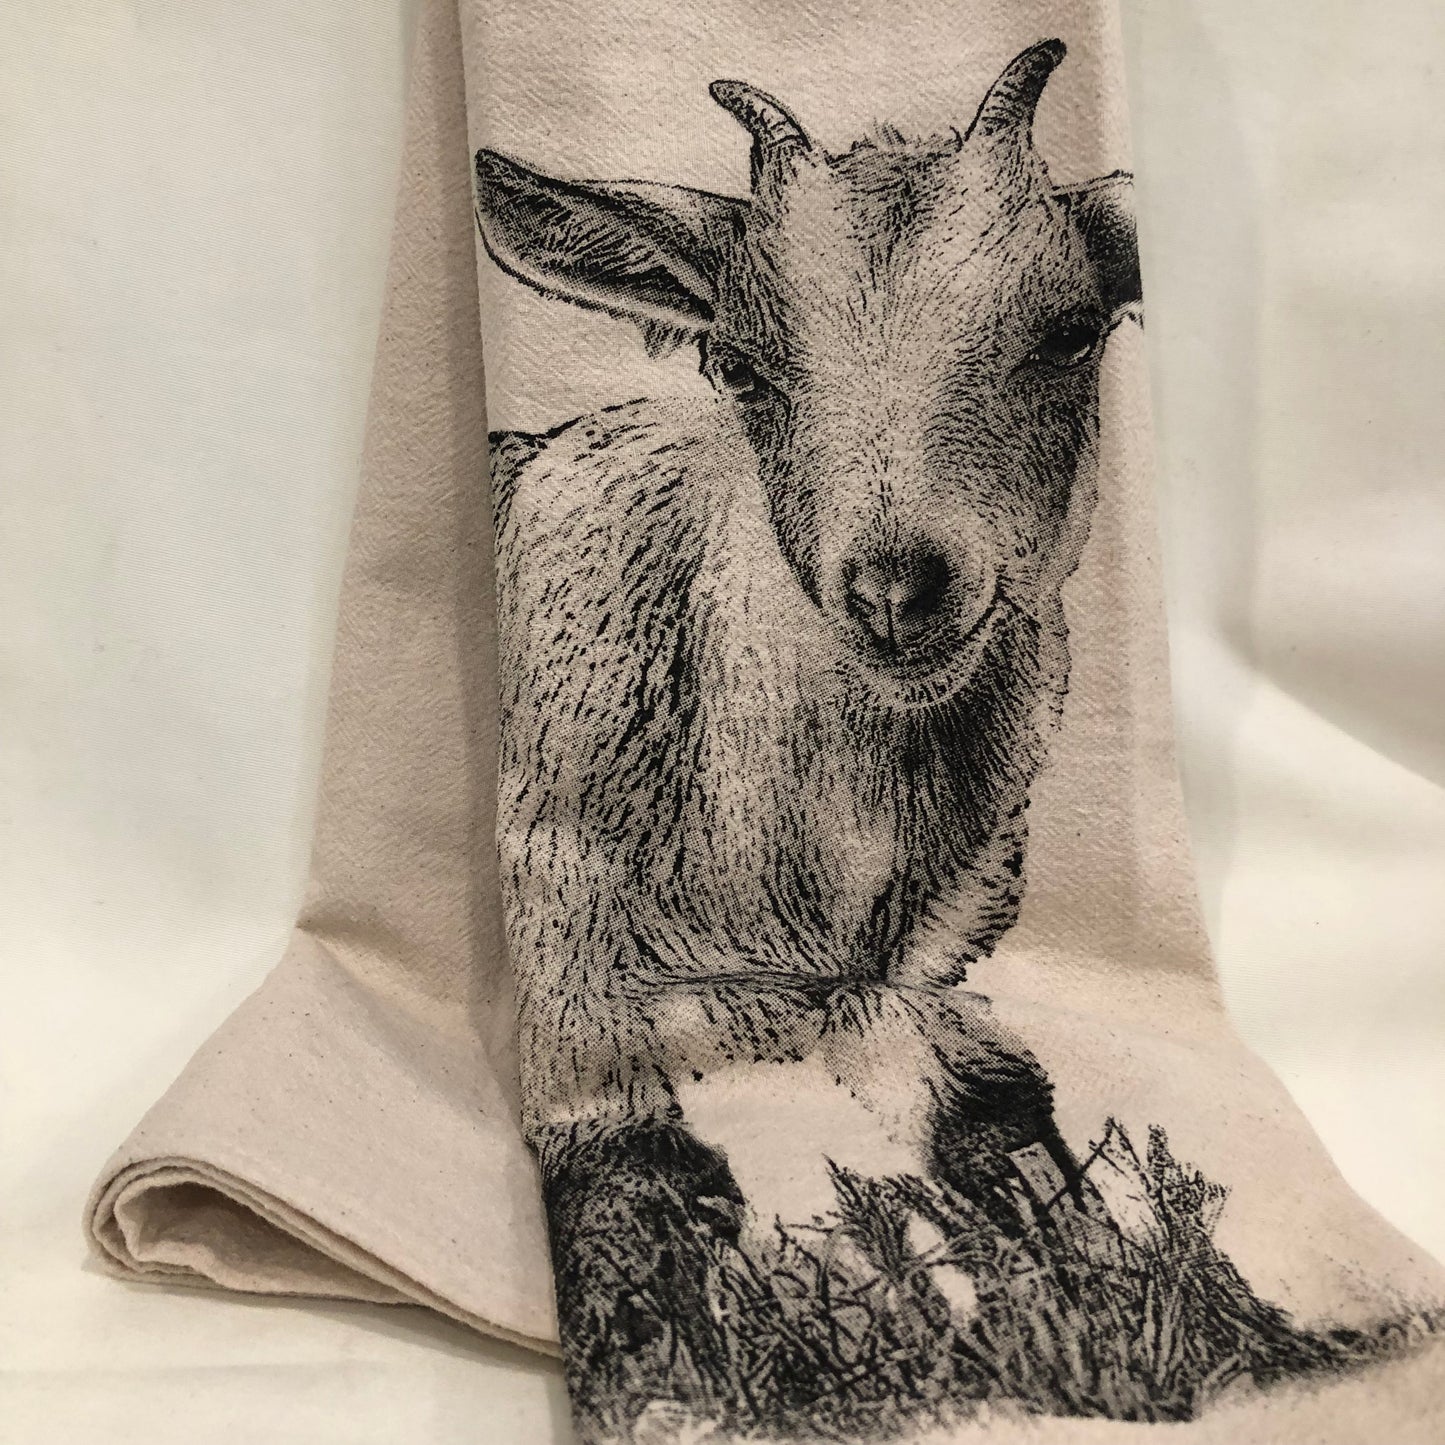 Towel, Flour Sack Kitchen Towel with Baby Goat